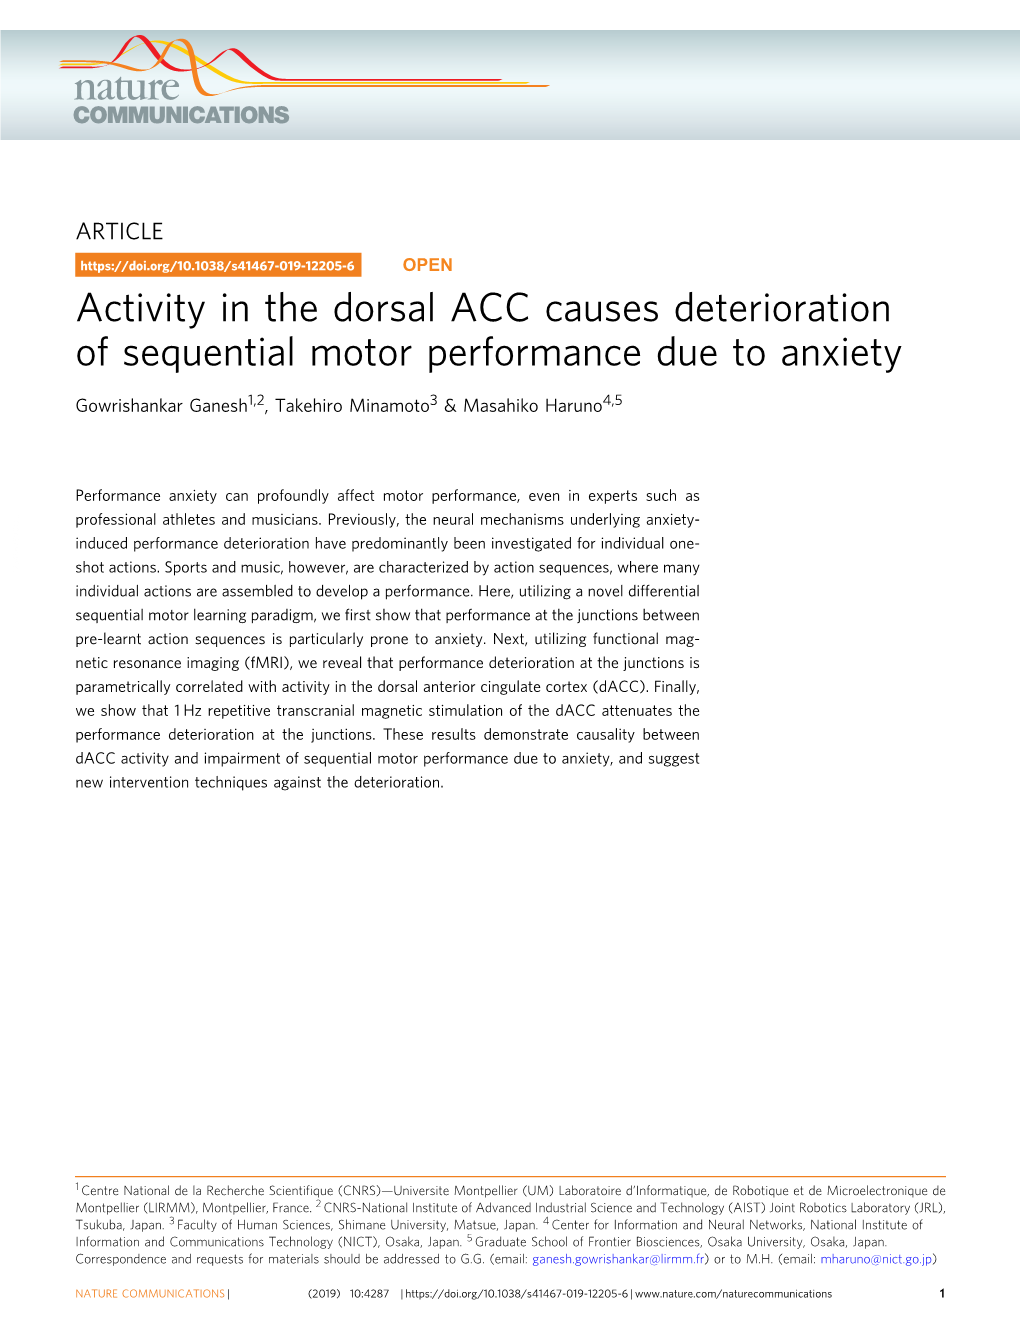 Activity in the Dorsal ACC Causes Deterioration of Sequential Motor Performance Due to Anxiety